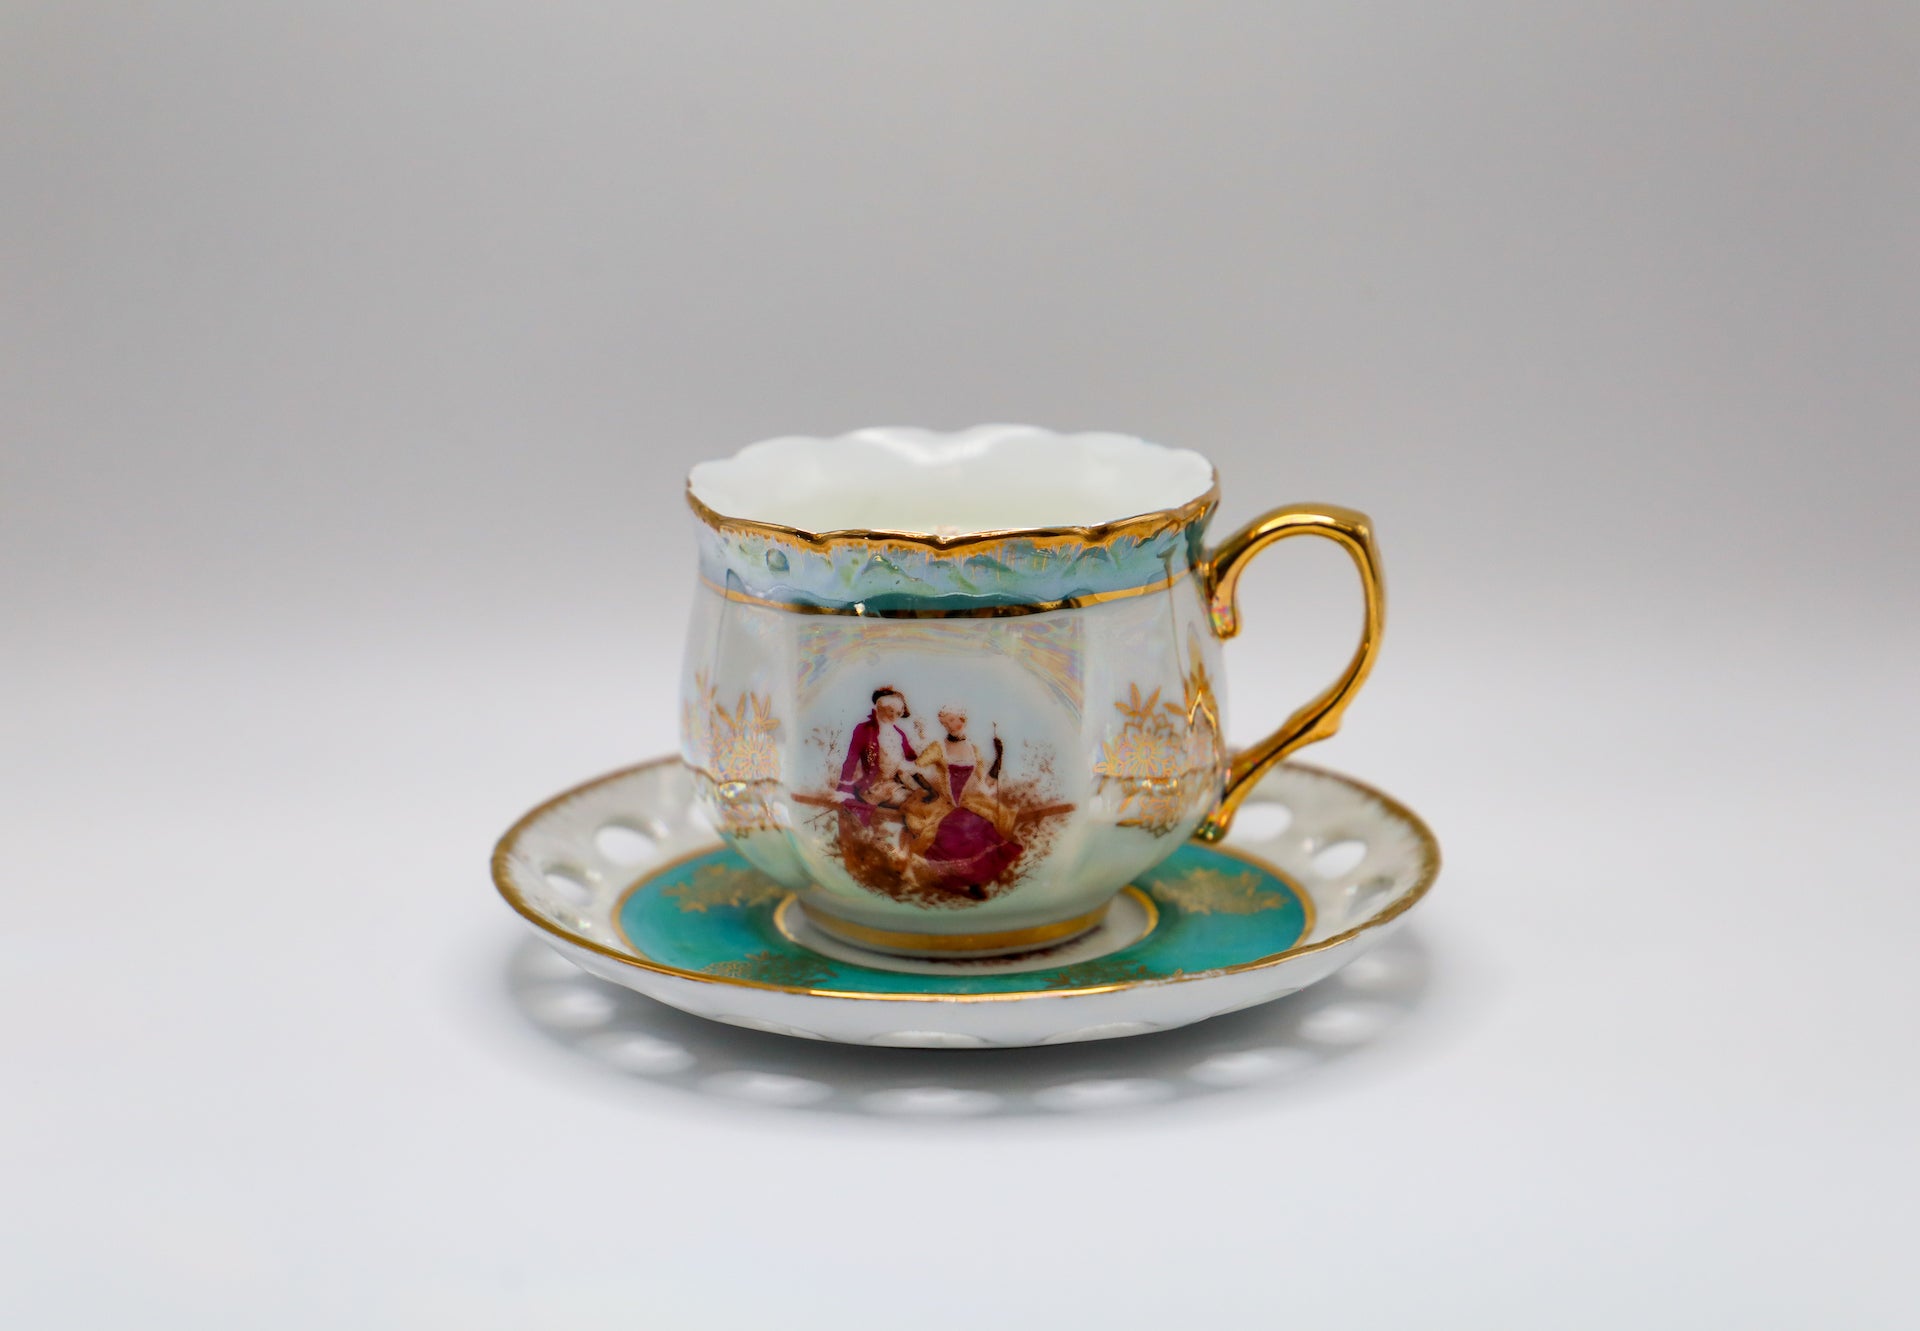 Petit cup and saucer in soft teal blue with gold accents and rich ruby jewel tone detail in the colonial couple on the side of the cup.  Leafy green floral and citrus scent.